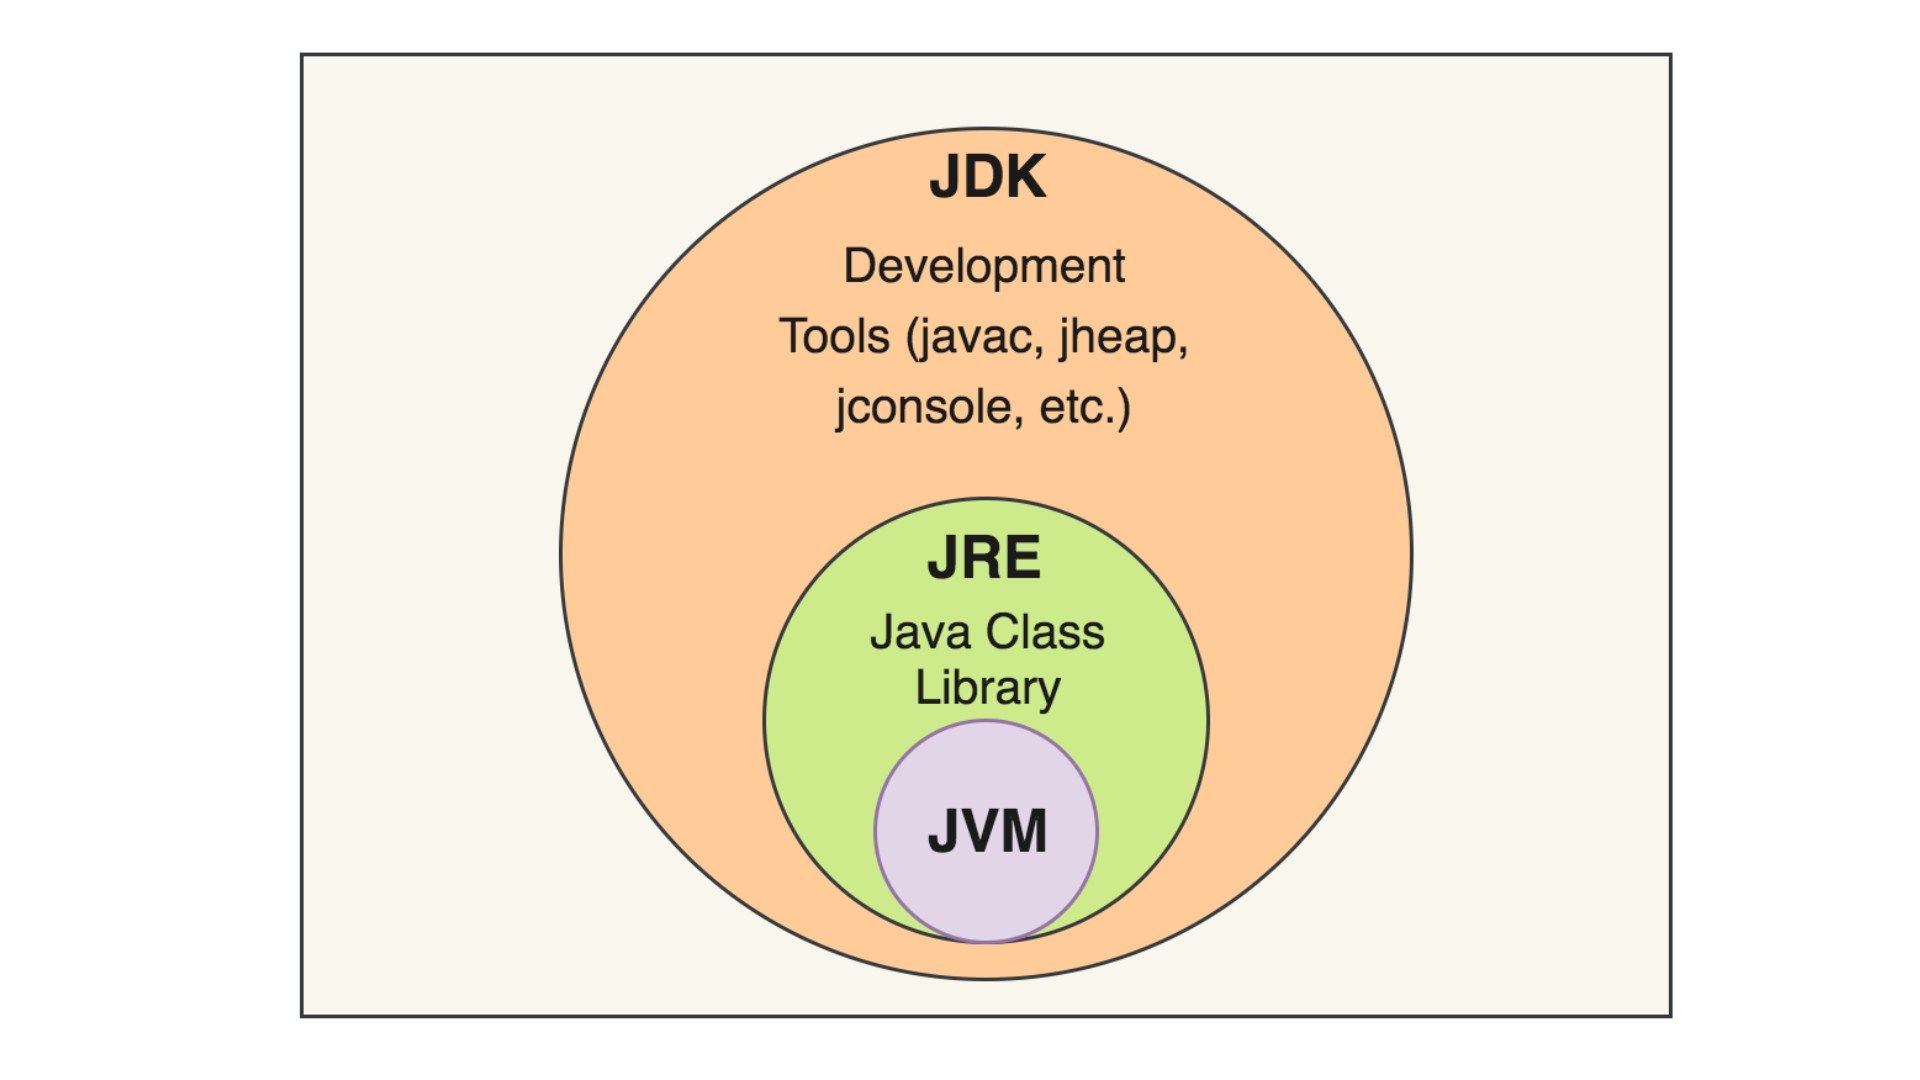  JDK, JRE and JVM